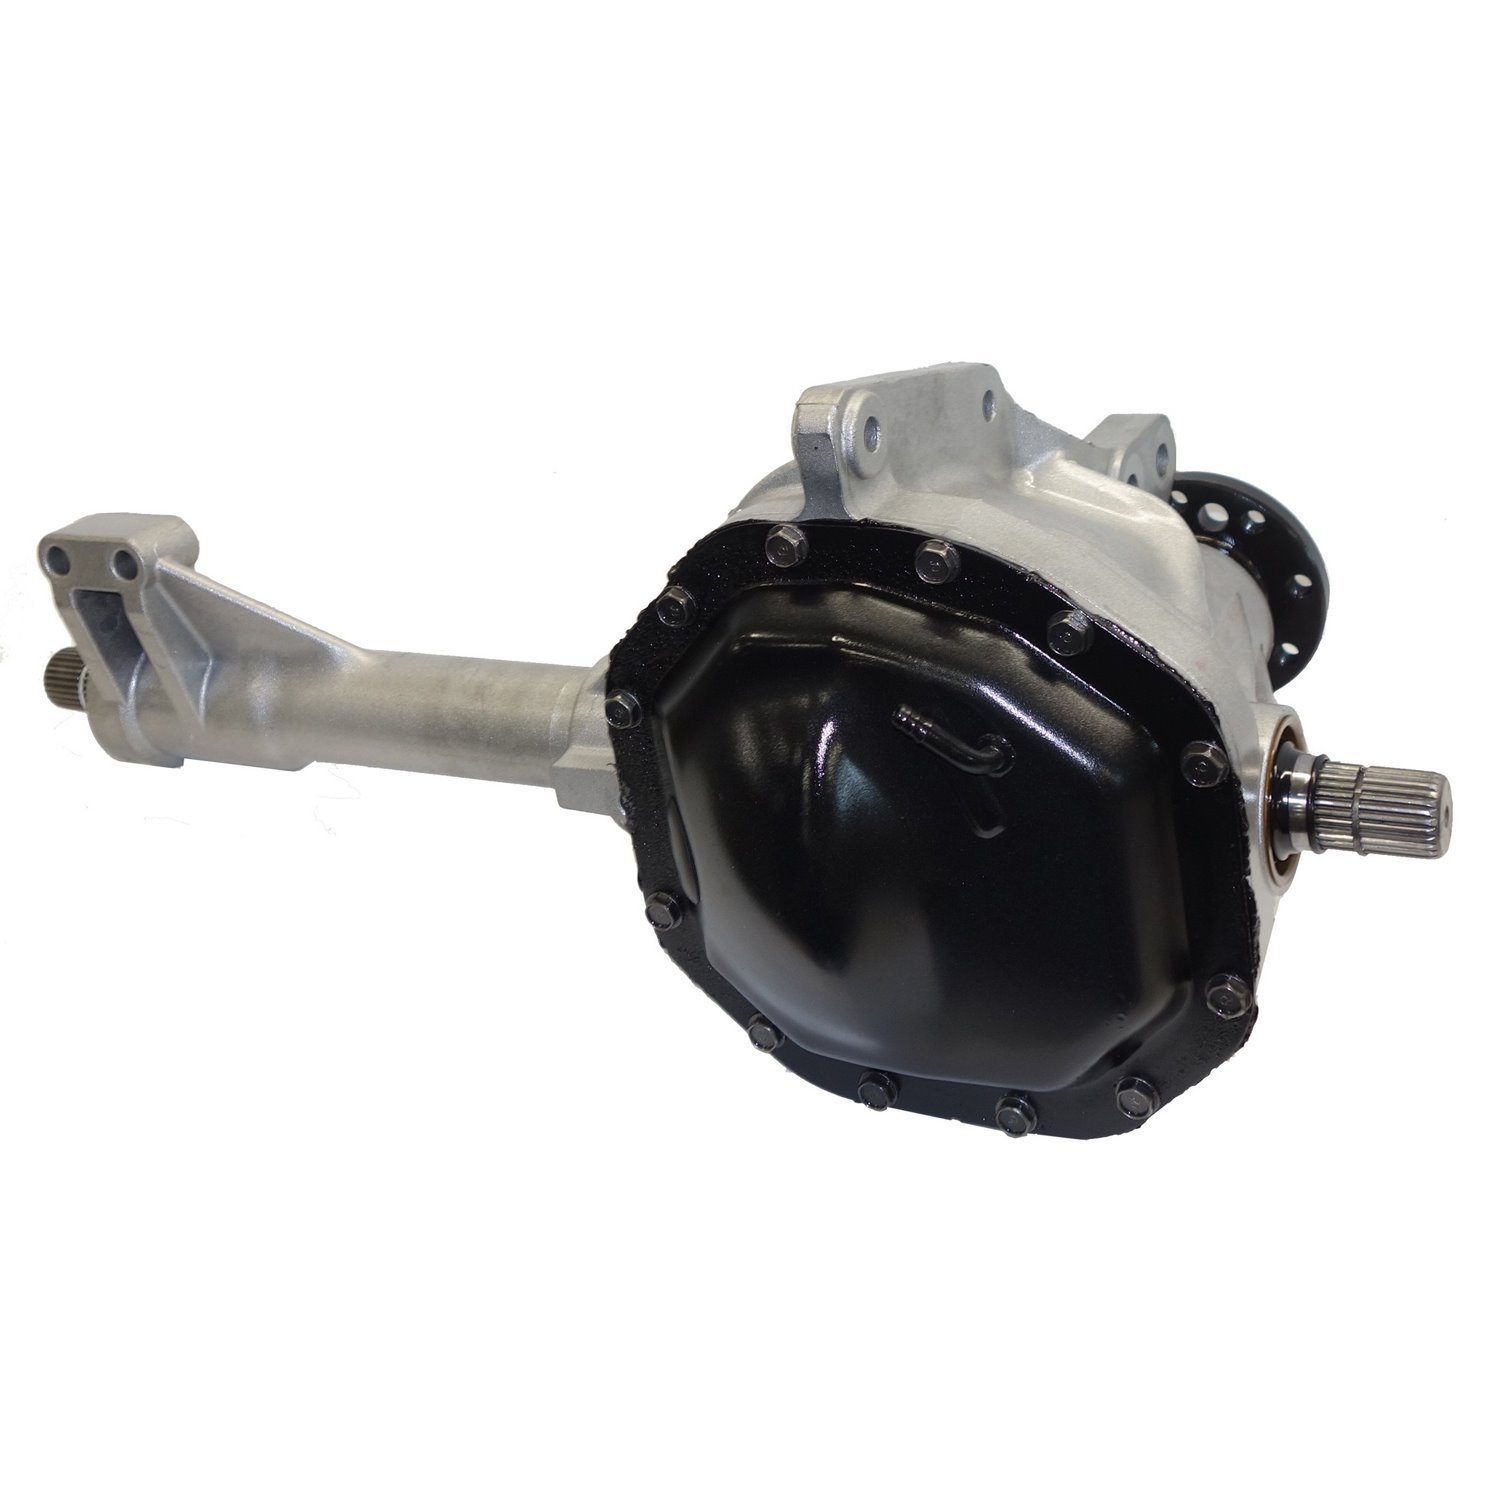 Remanufactured Axle Assembly for 8.0" IFS 02-05 Dodge Ram 1500 3.92 Ratio